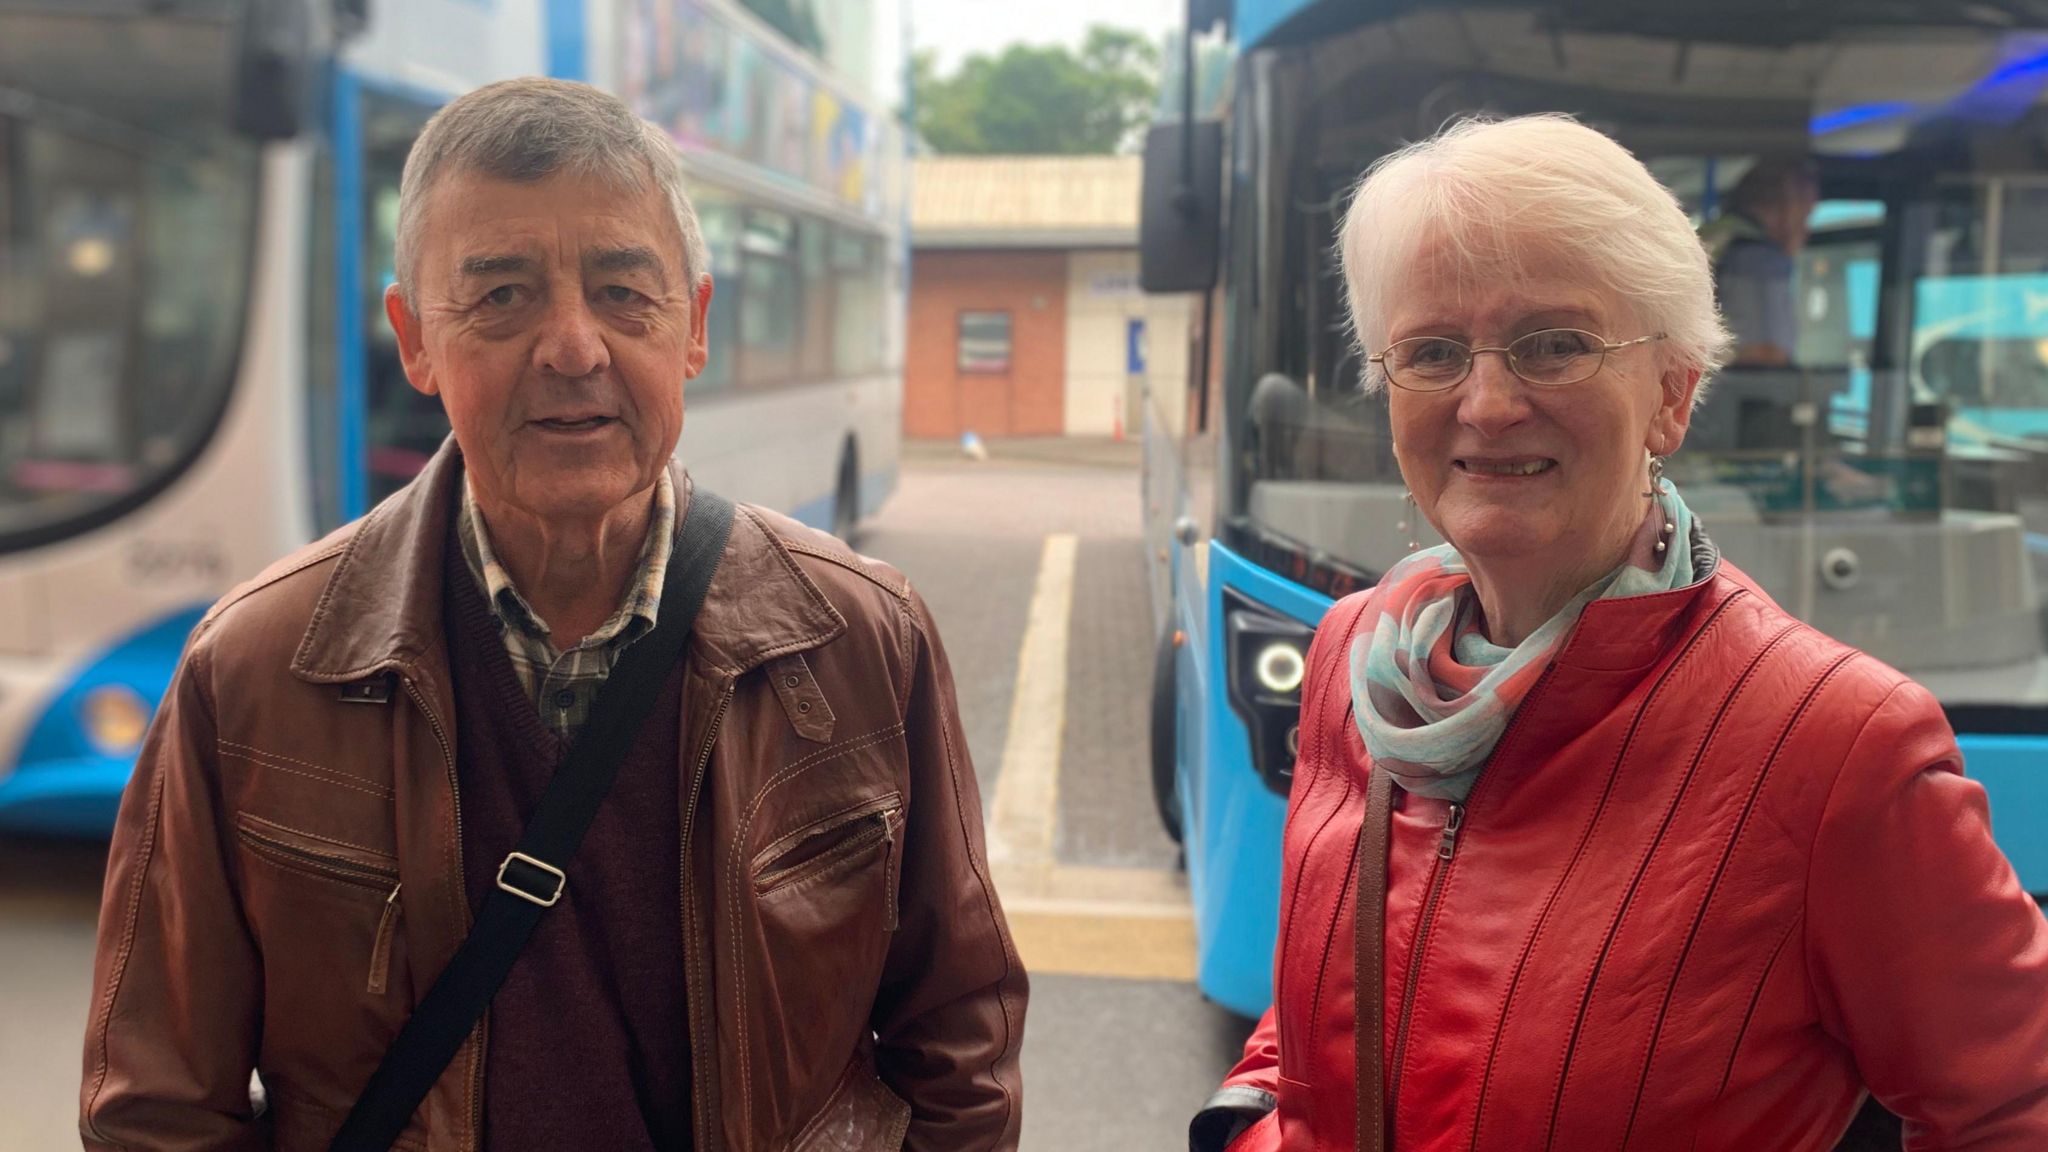 Brendan and Margaret Jamison - an older man with grey hair wears a brown leather jacket and a woman in a red leather jacket and white hair stands beside him